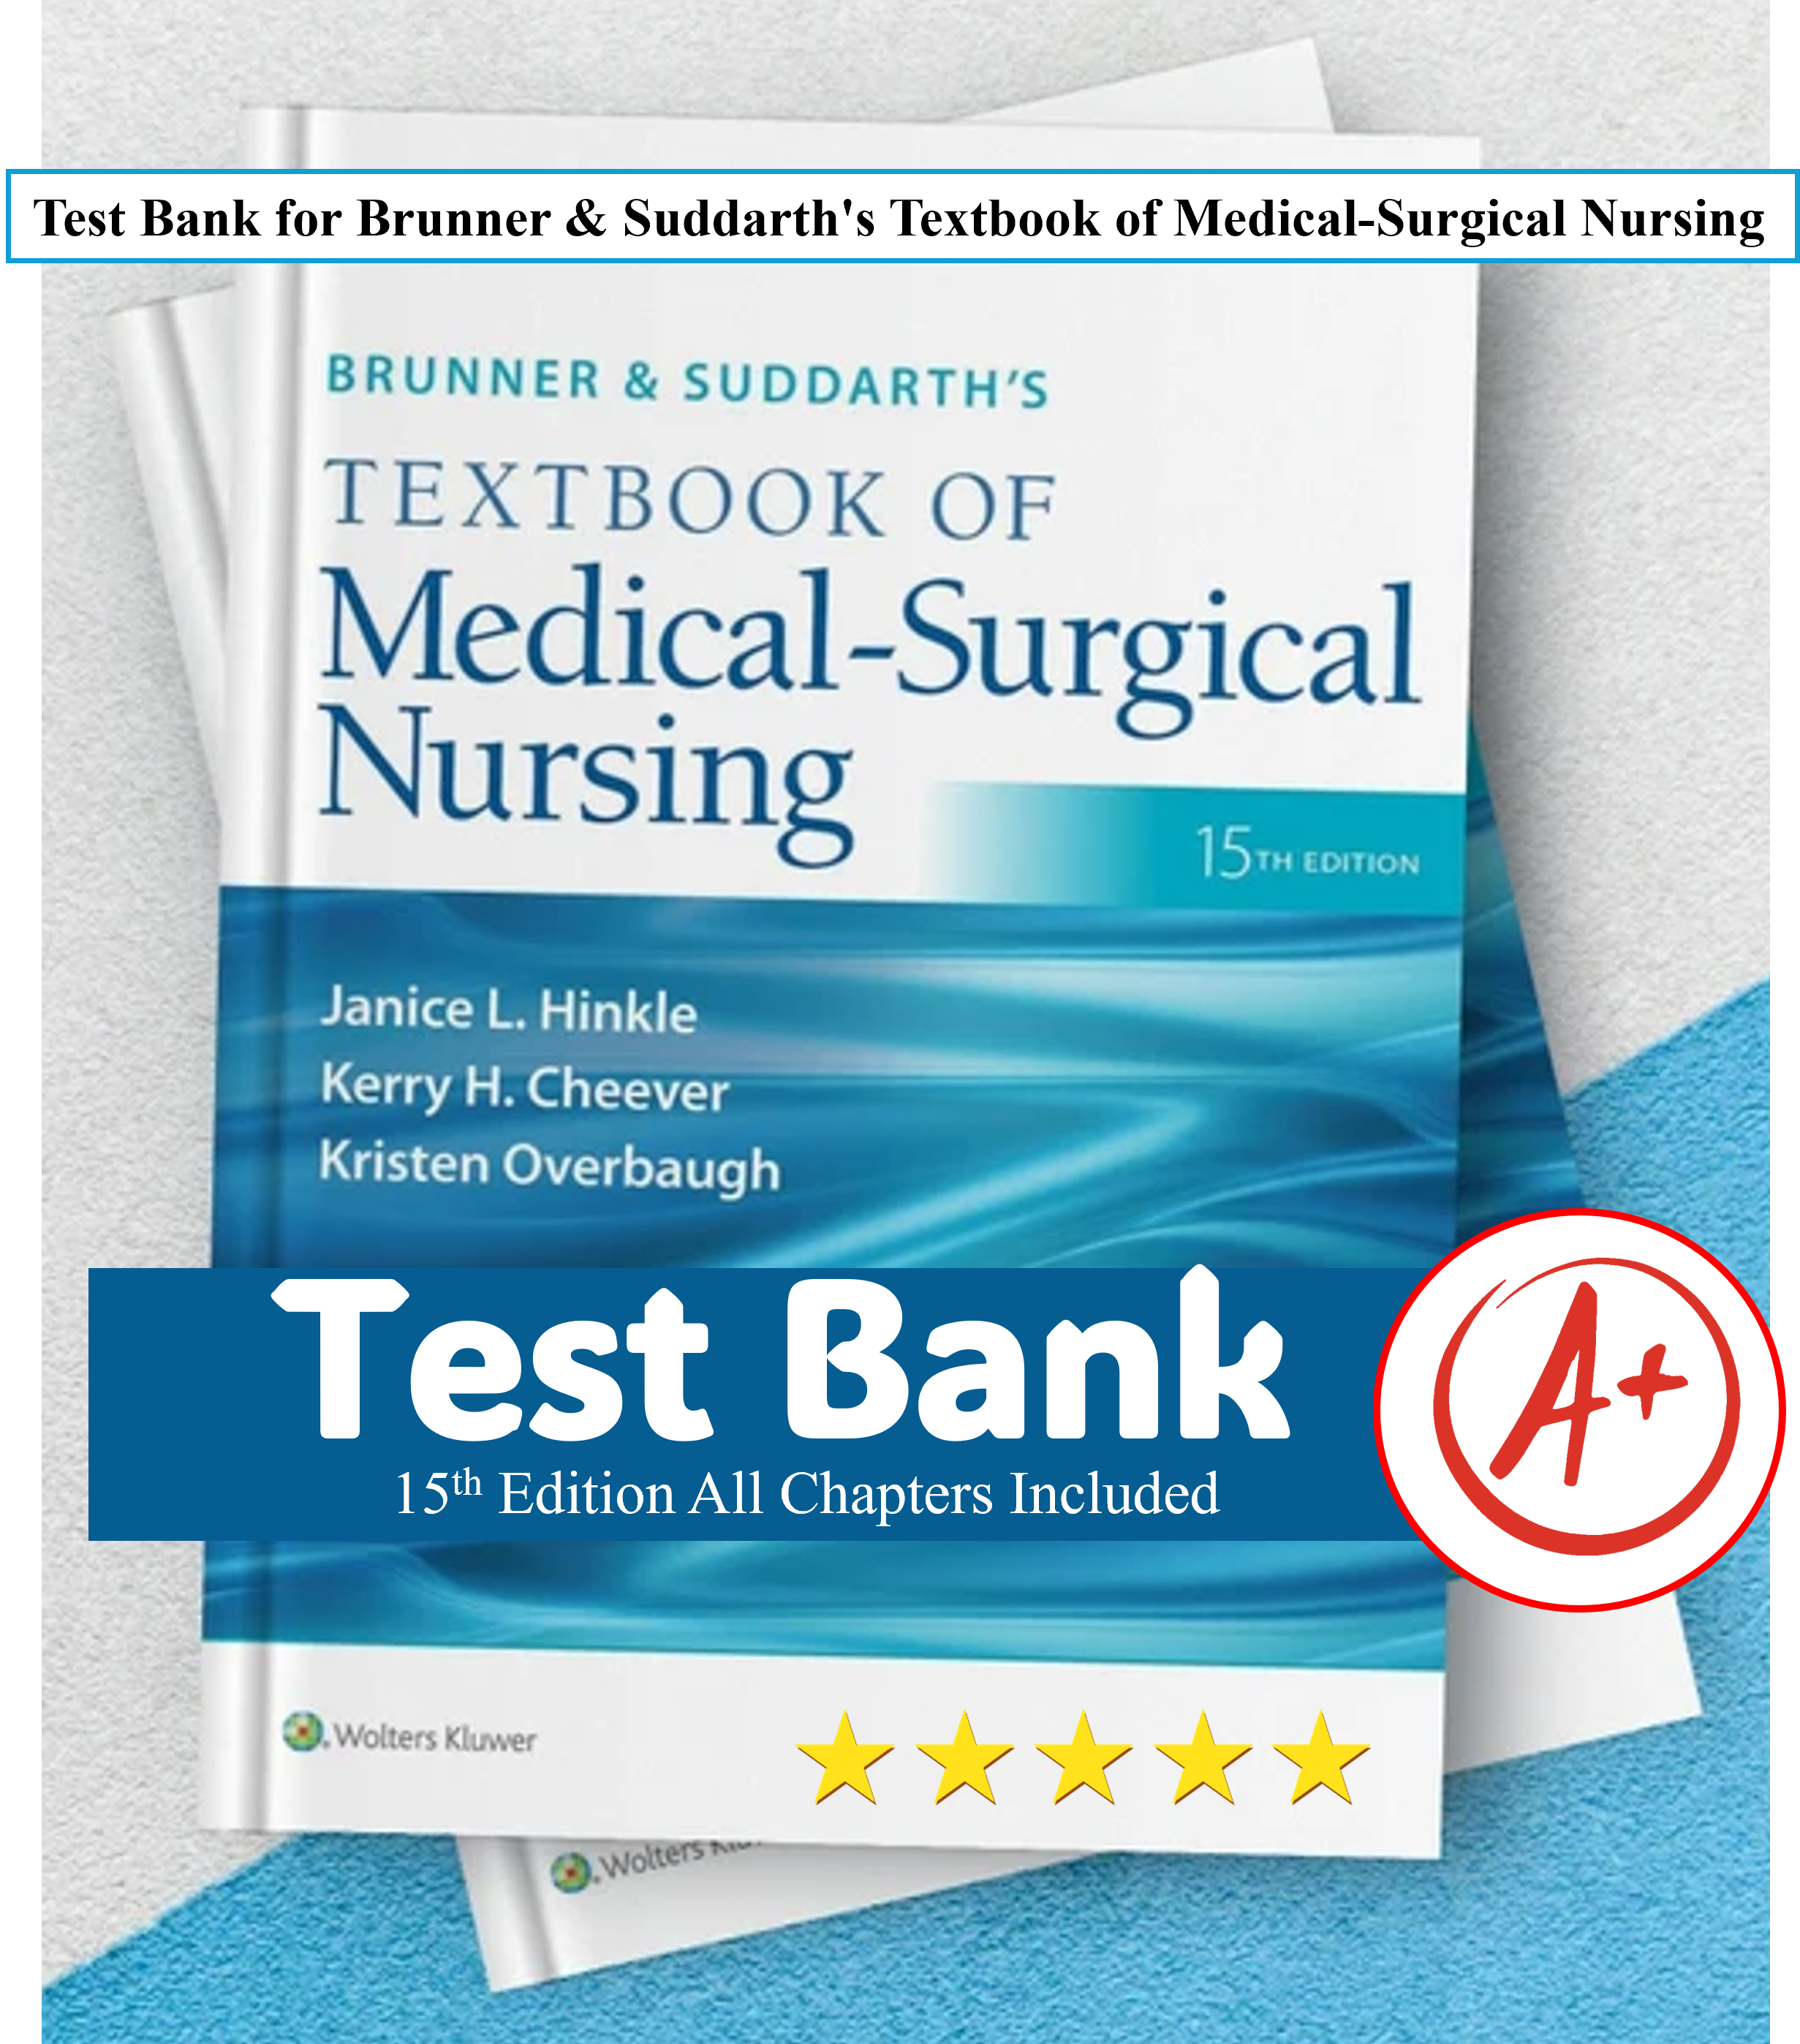 Brunner & Suddarth’s Textbook of Medical-Surgical Nursing 15th edition Test Bank Janice L Hinkle, Kerry H. Cheever – All Chapters